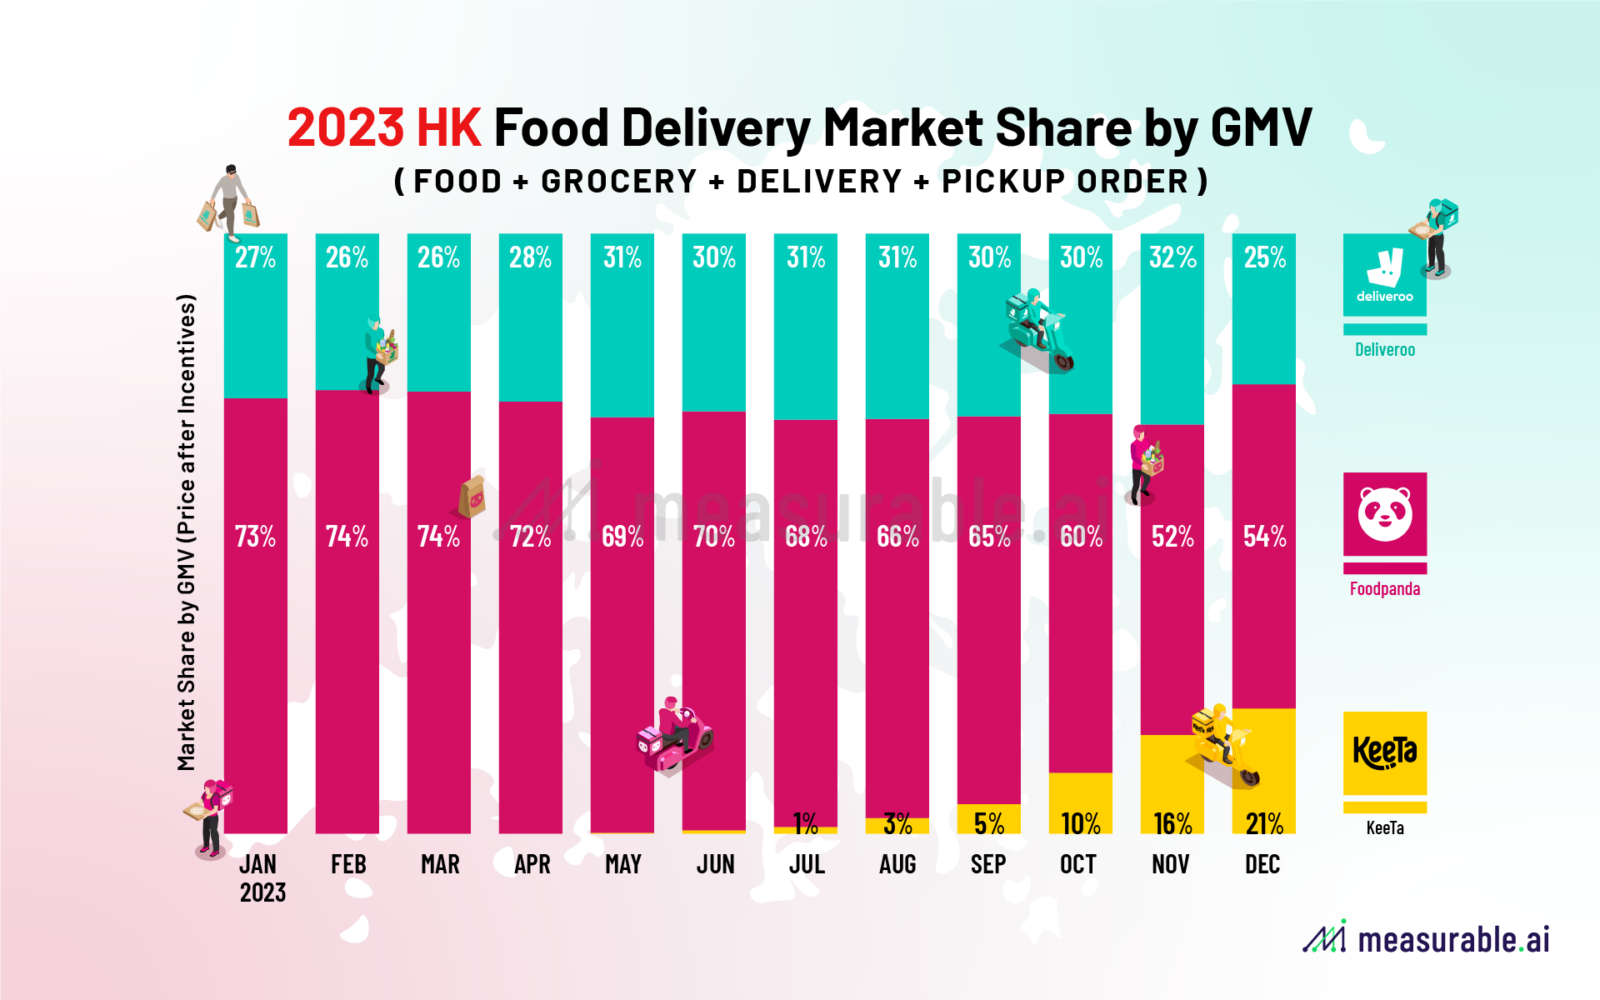 2023 HK Food Delivery Market Share by GMV